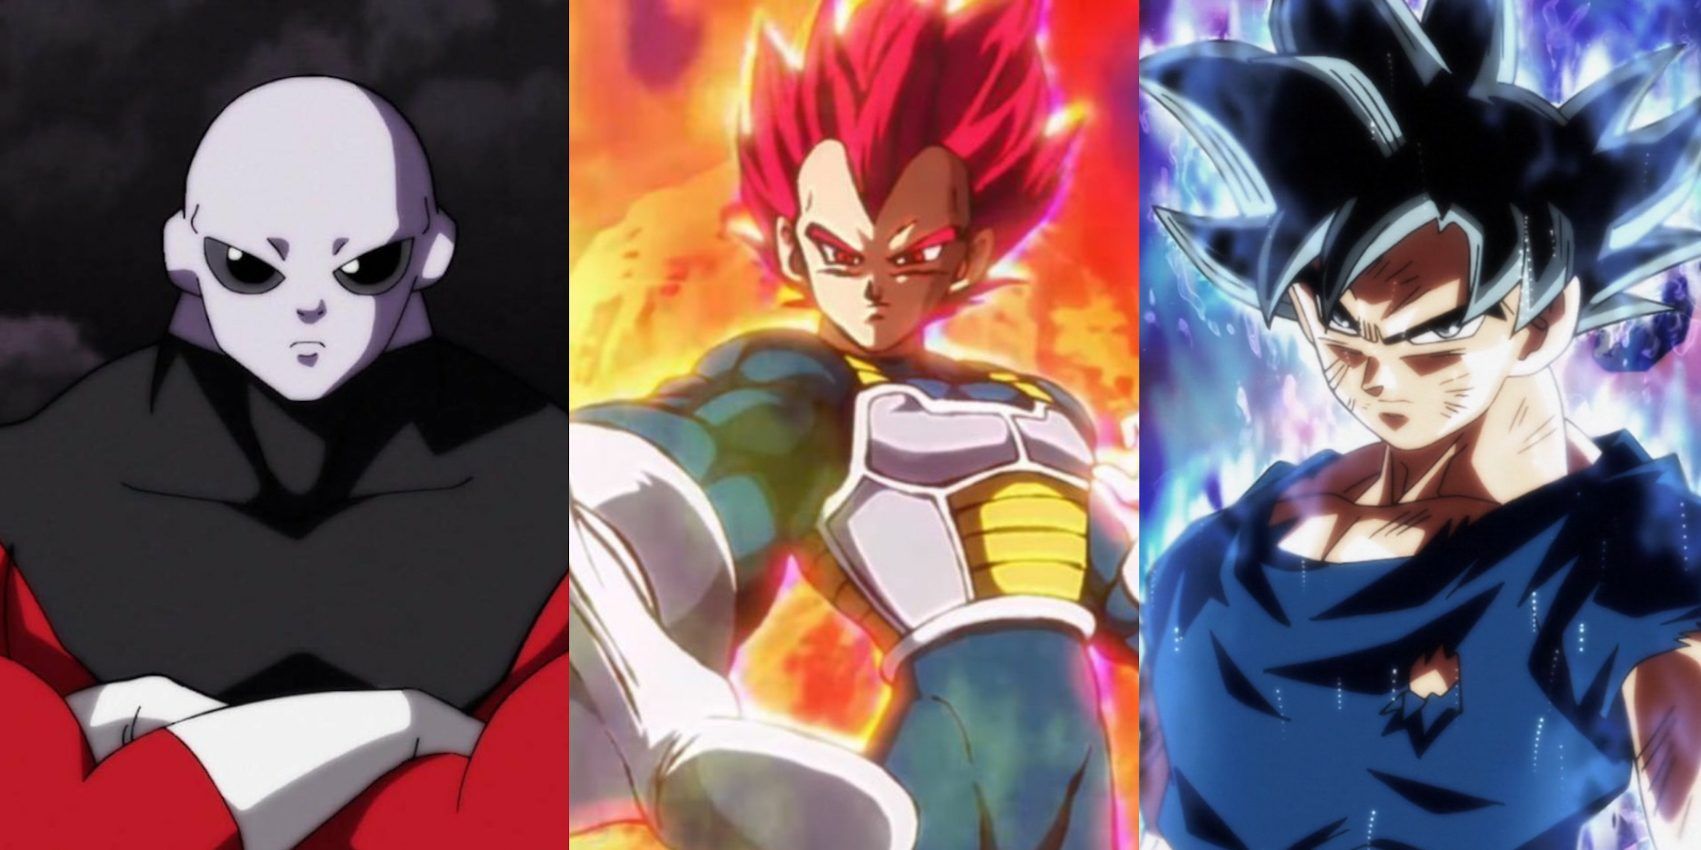 Dragon Ball Super 10 Strongest Characters In The Tournament Of Power Ranked